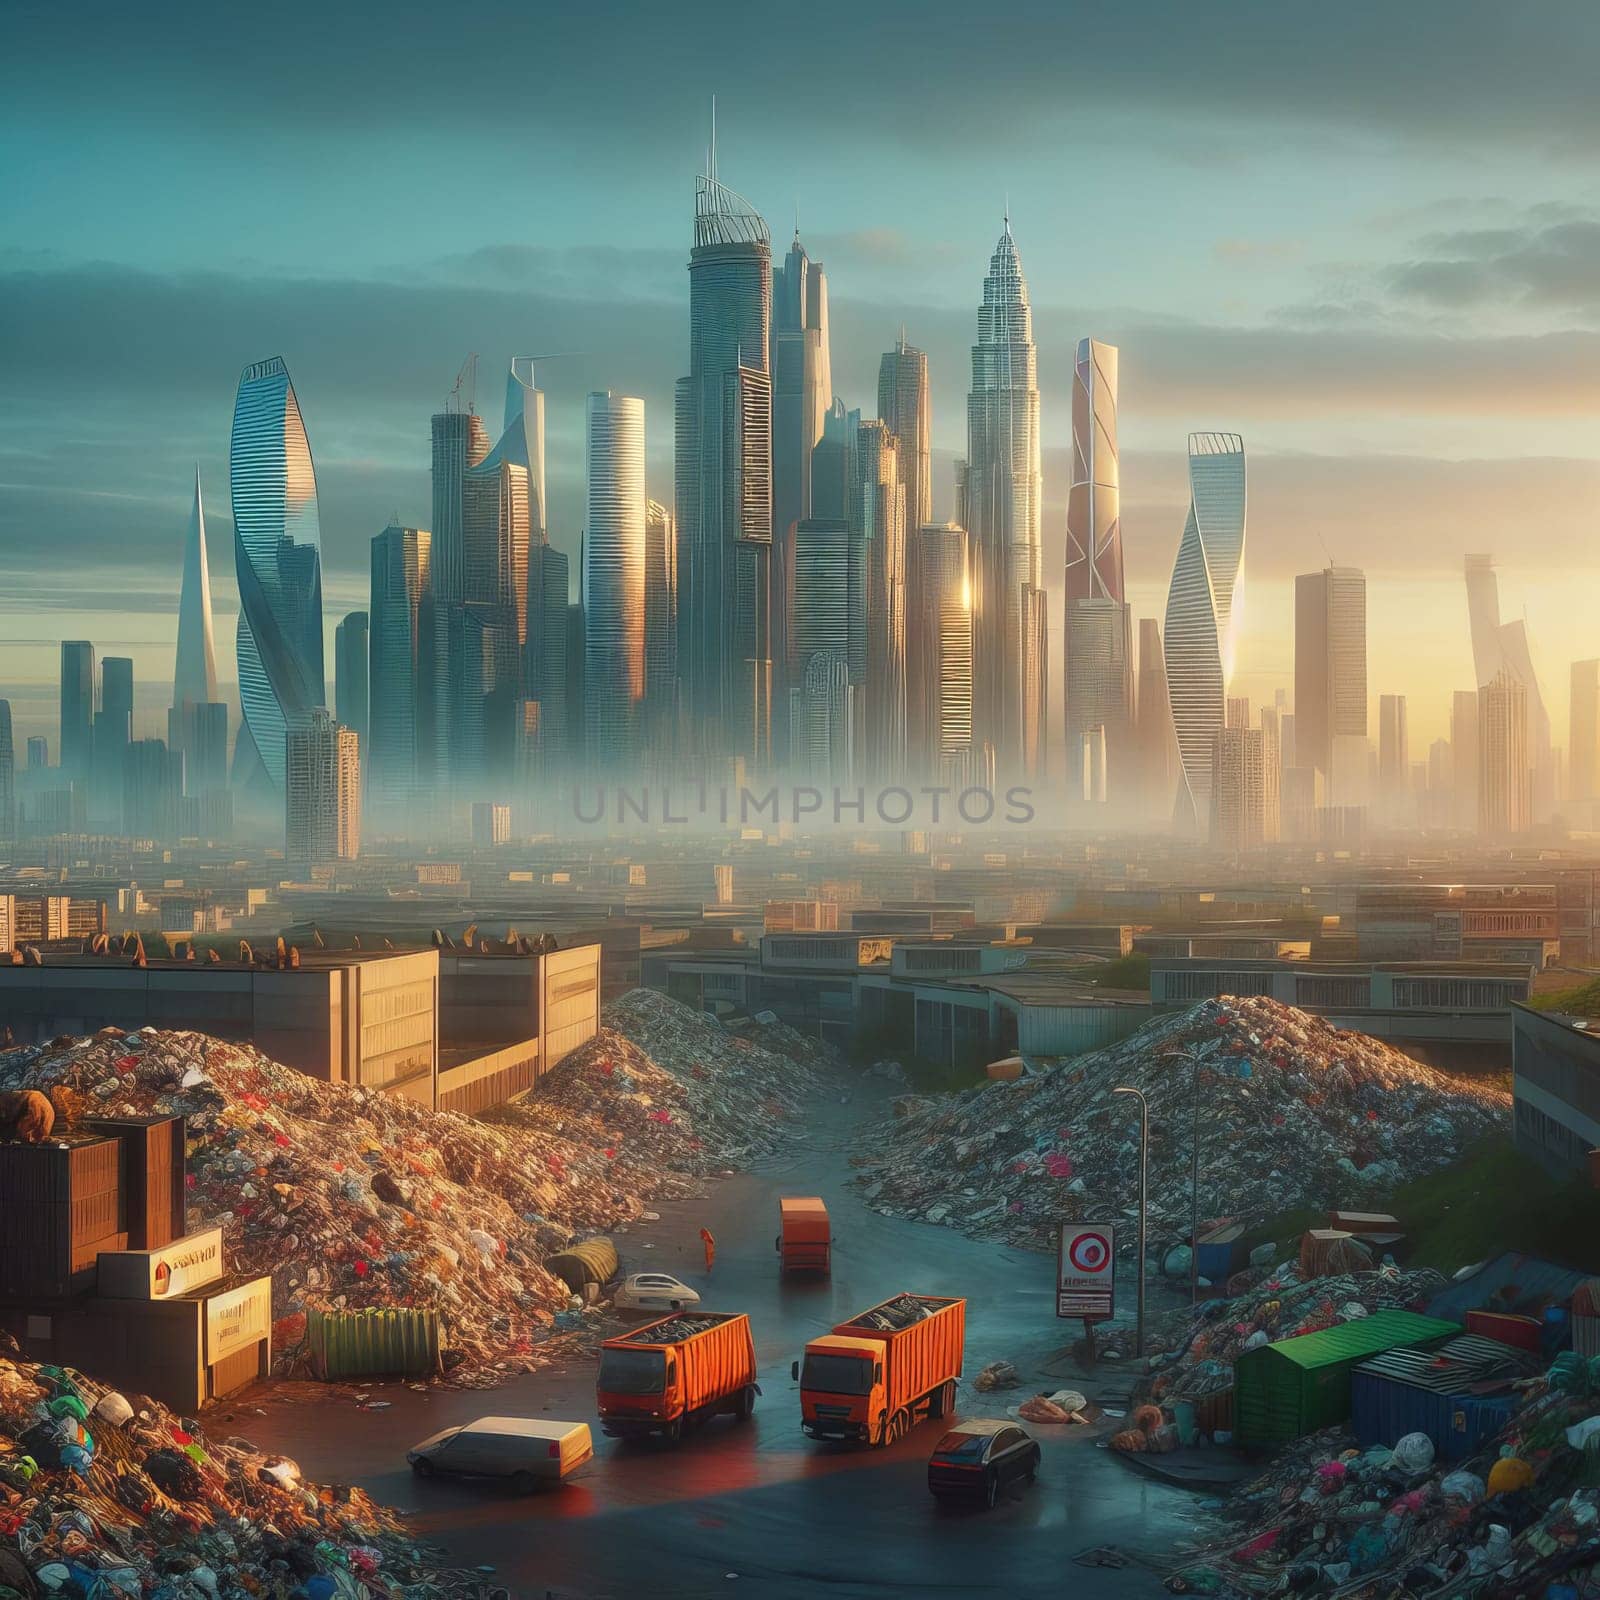 Photo realistic image of a futuristic city skyline with a garbage dump in the foreground, bathed in a warm glow from the setting sun